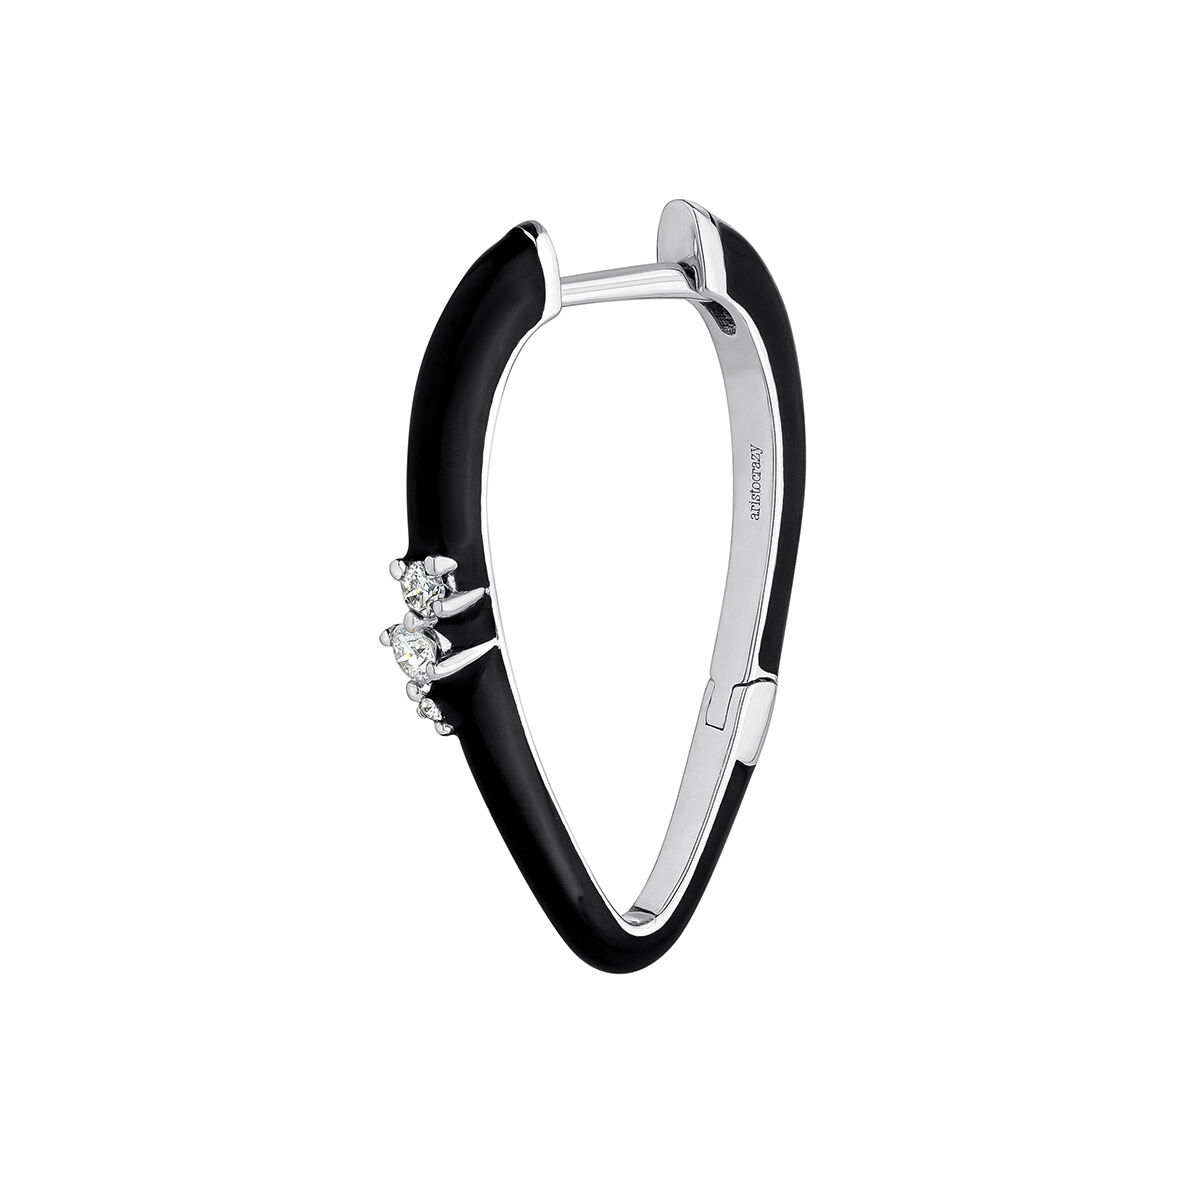 Single oval hoop earring in 18k white gold with black enamel and diamonds, J05115-01-BLKENA-H, hi-res